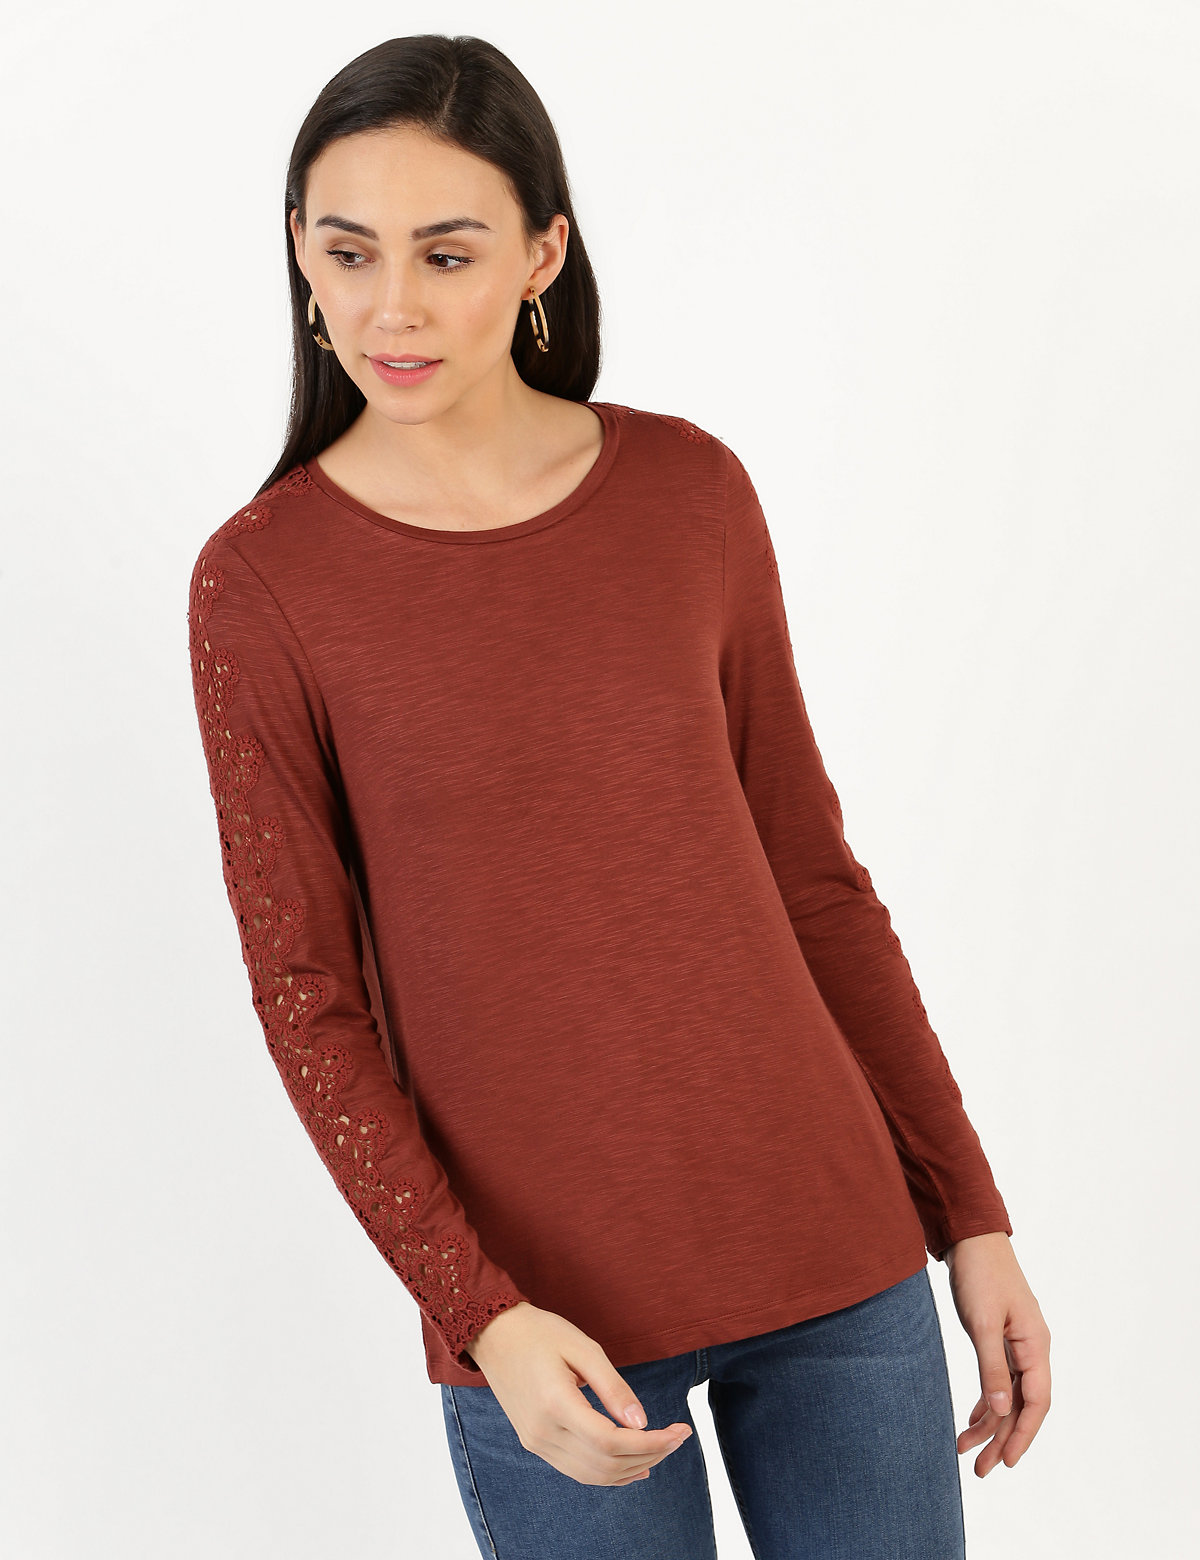 Lace Detail Tee